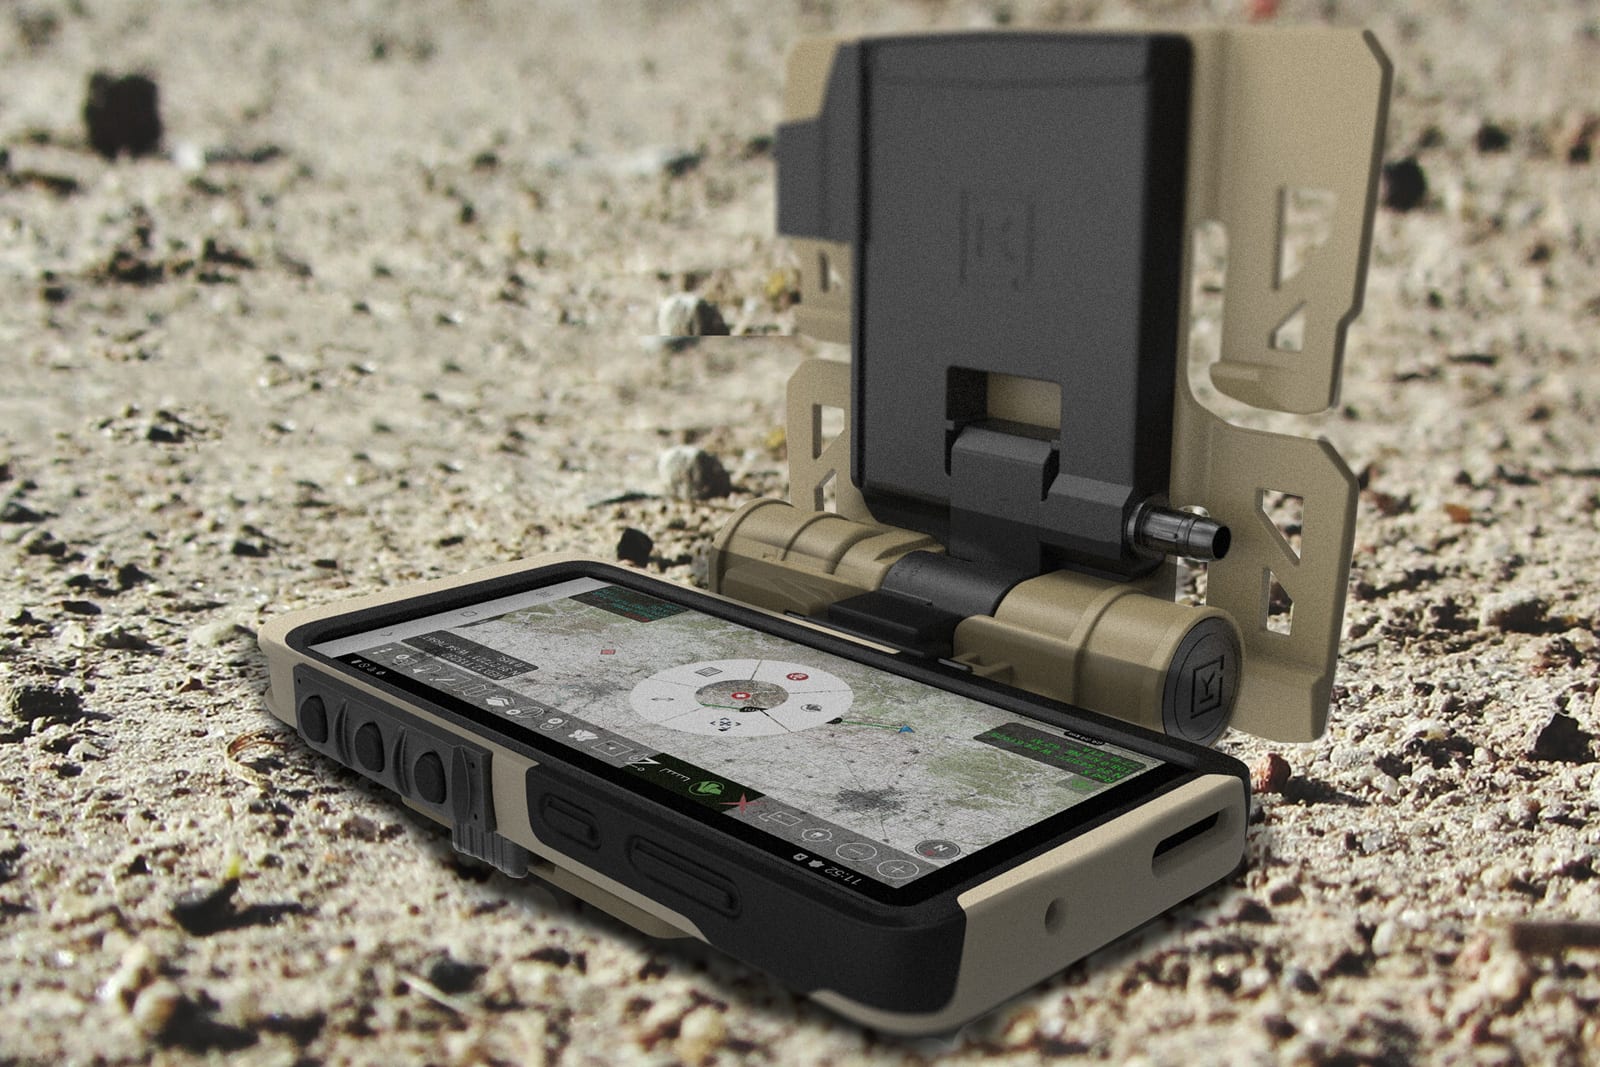 Samsung Galaxy S20 Tactical Edition Smartphone for Military Use